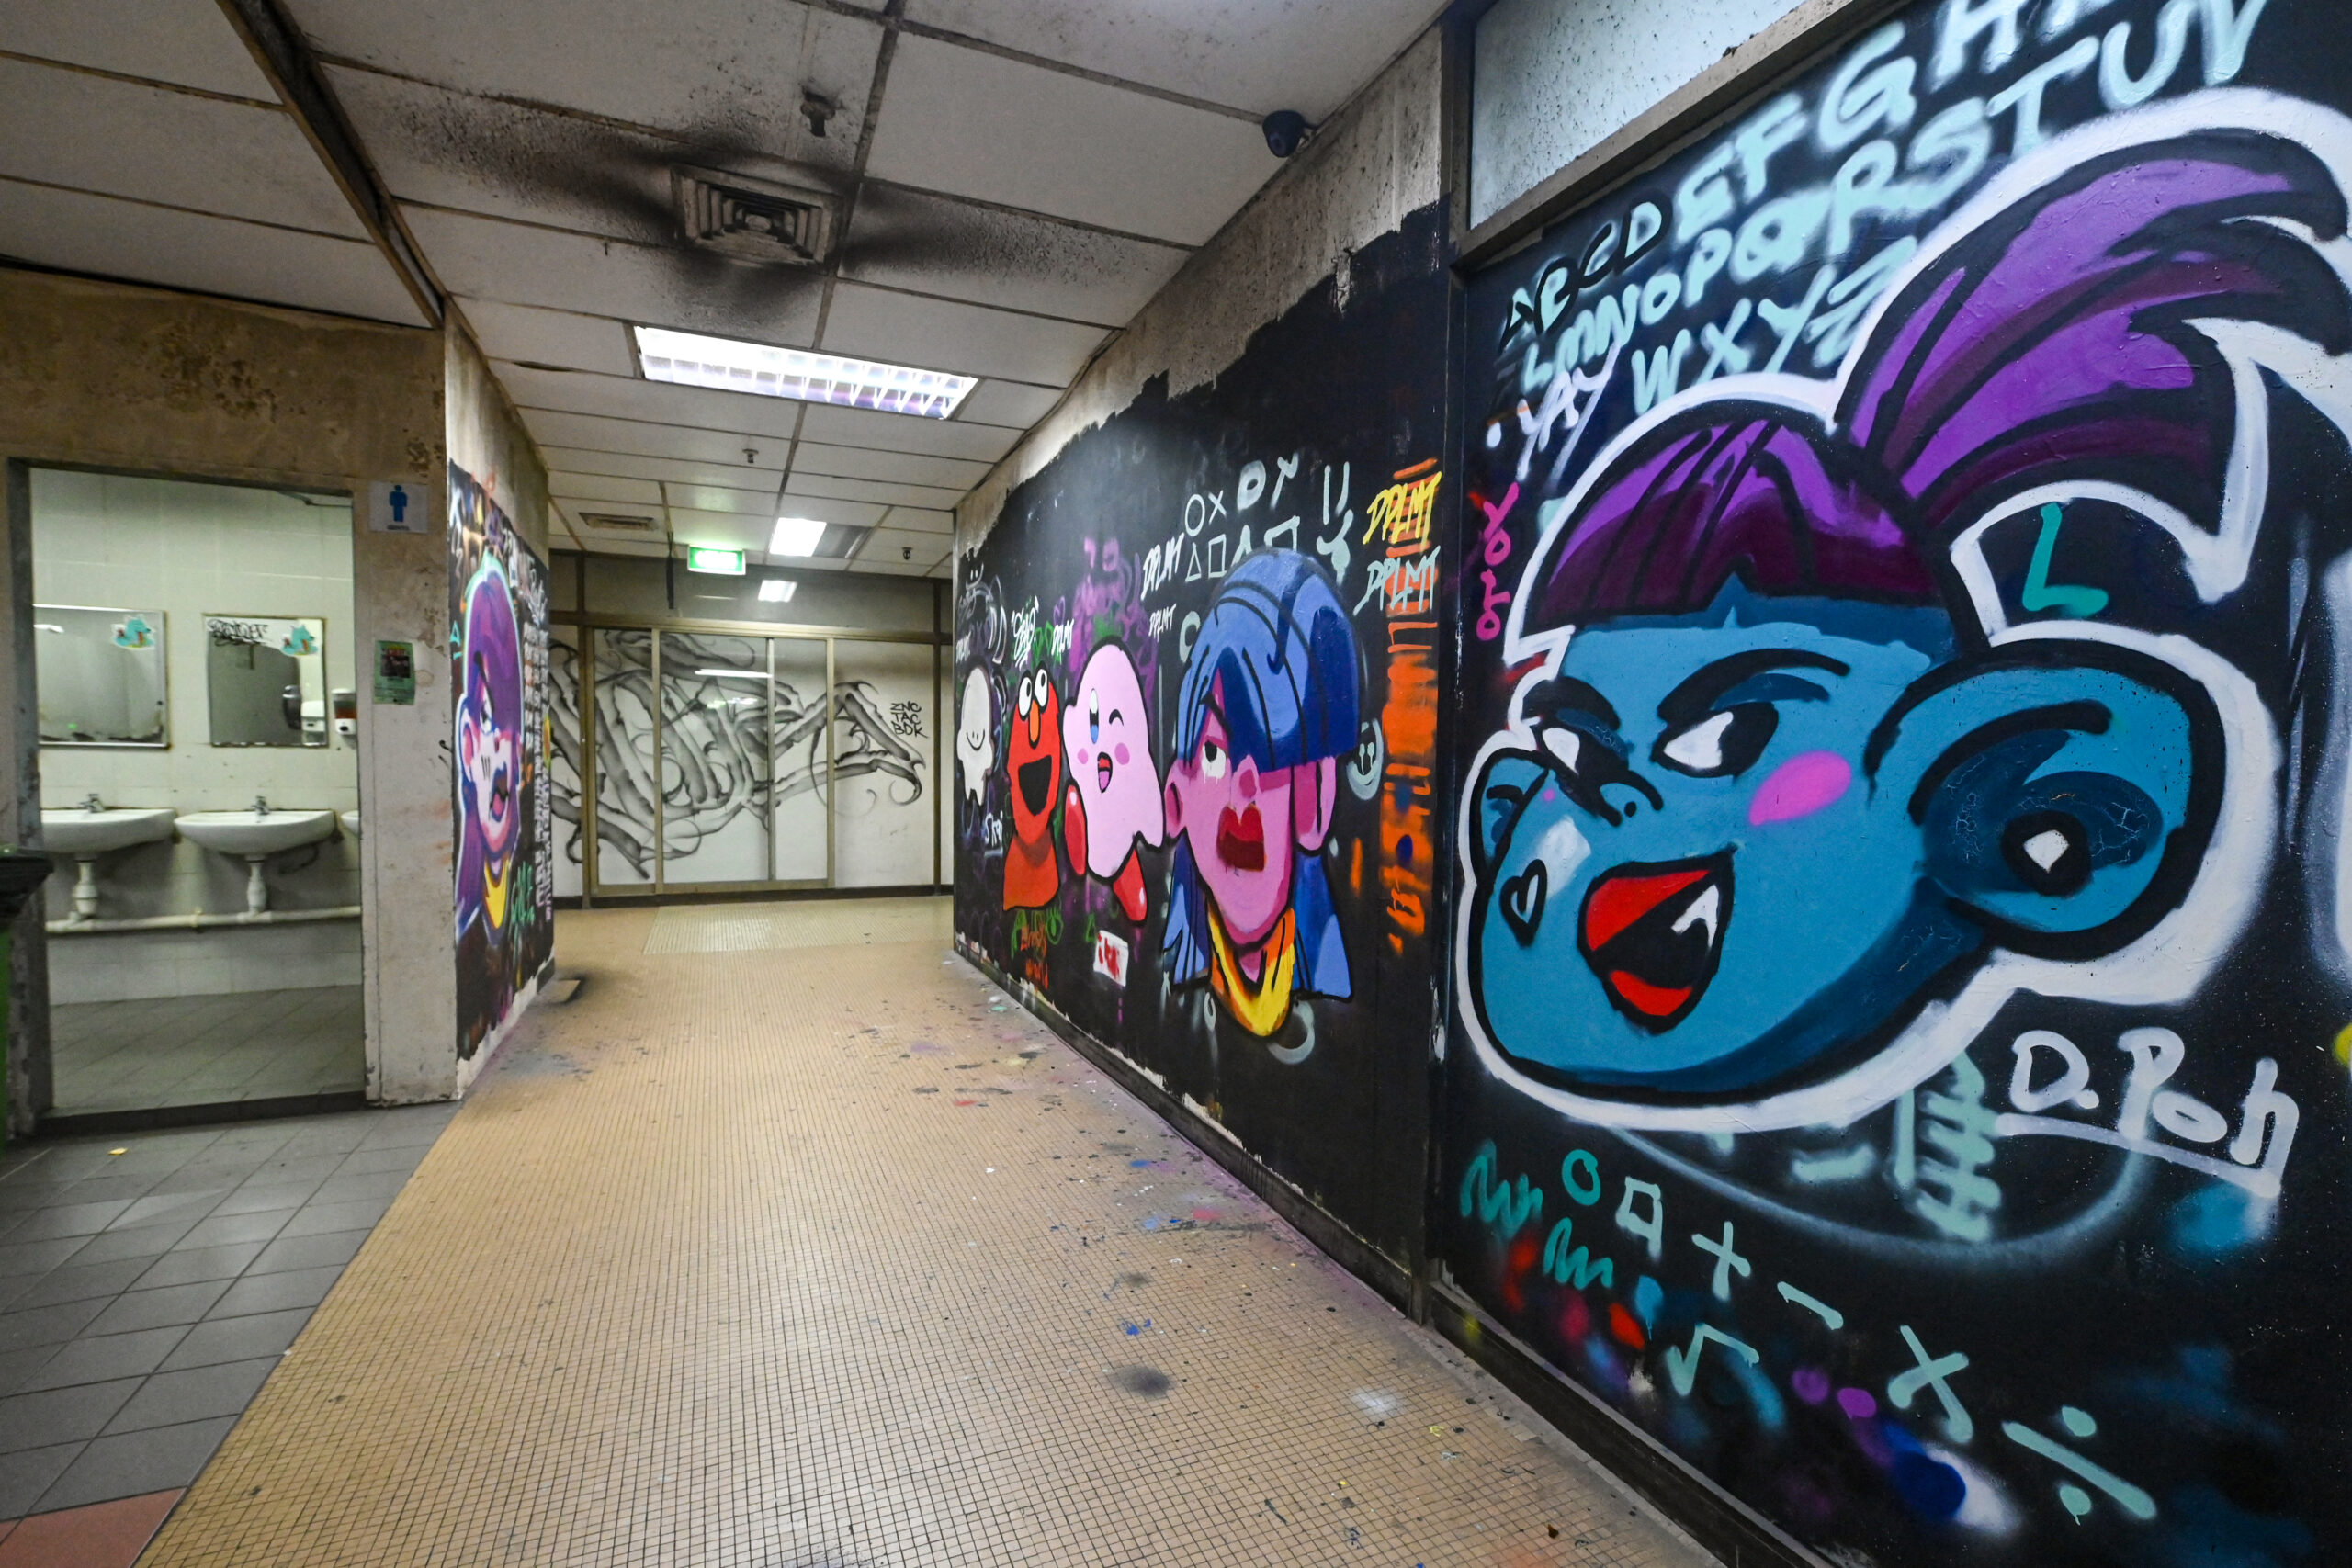 Bathroom walls and mirrors are also splattered with graffiti